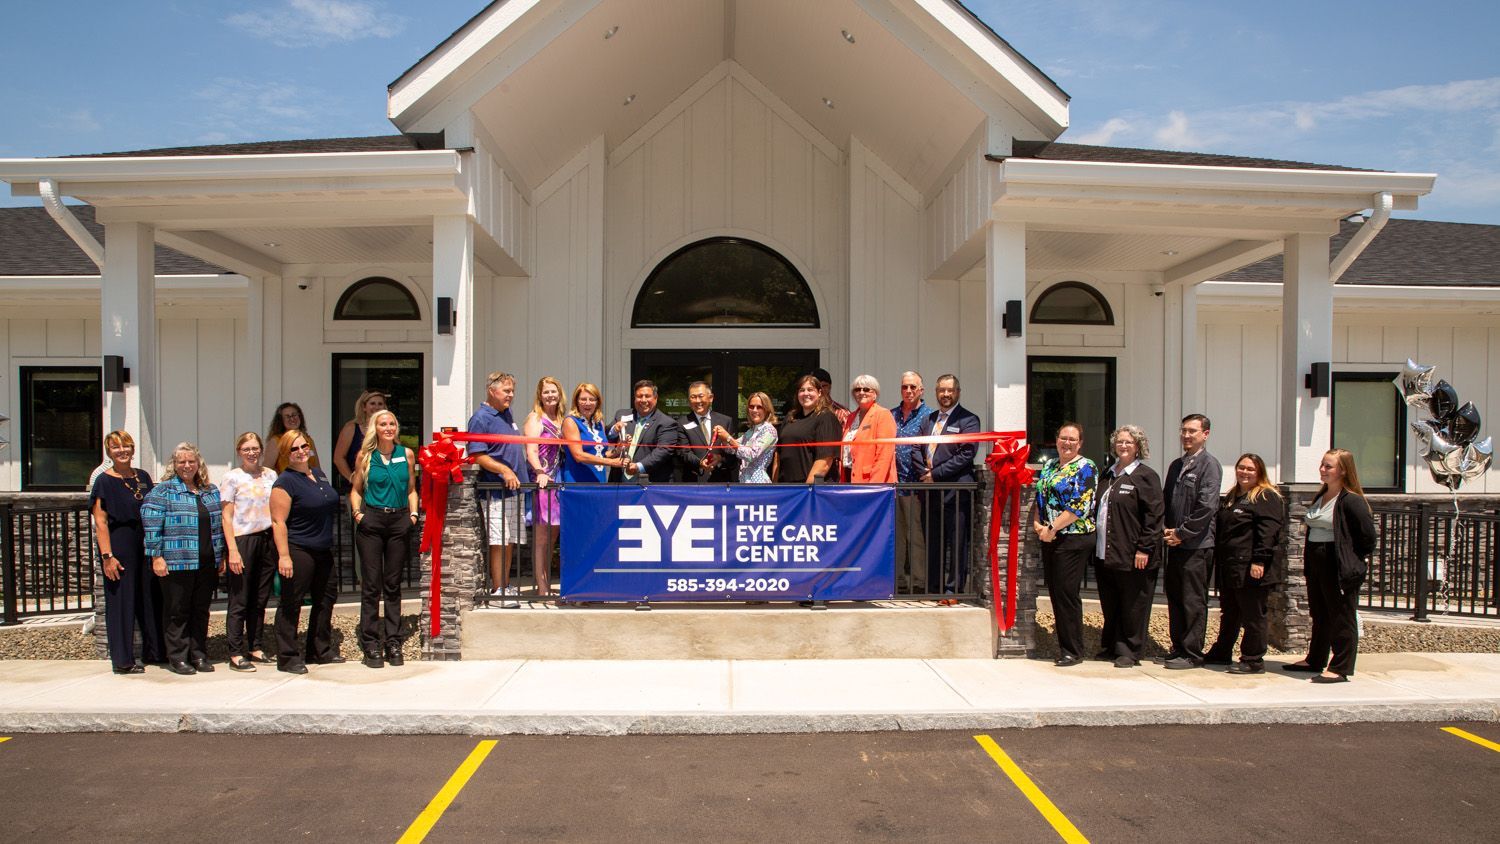 ribbon-cutting ceremony outside The Eye Care Center in Macedon, New York.